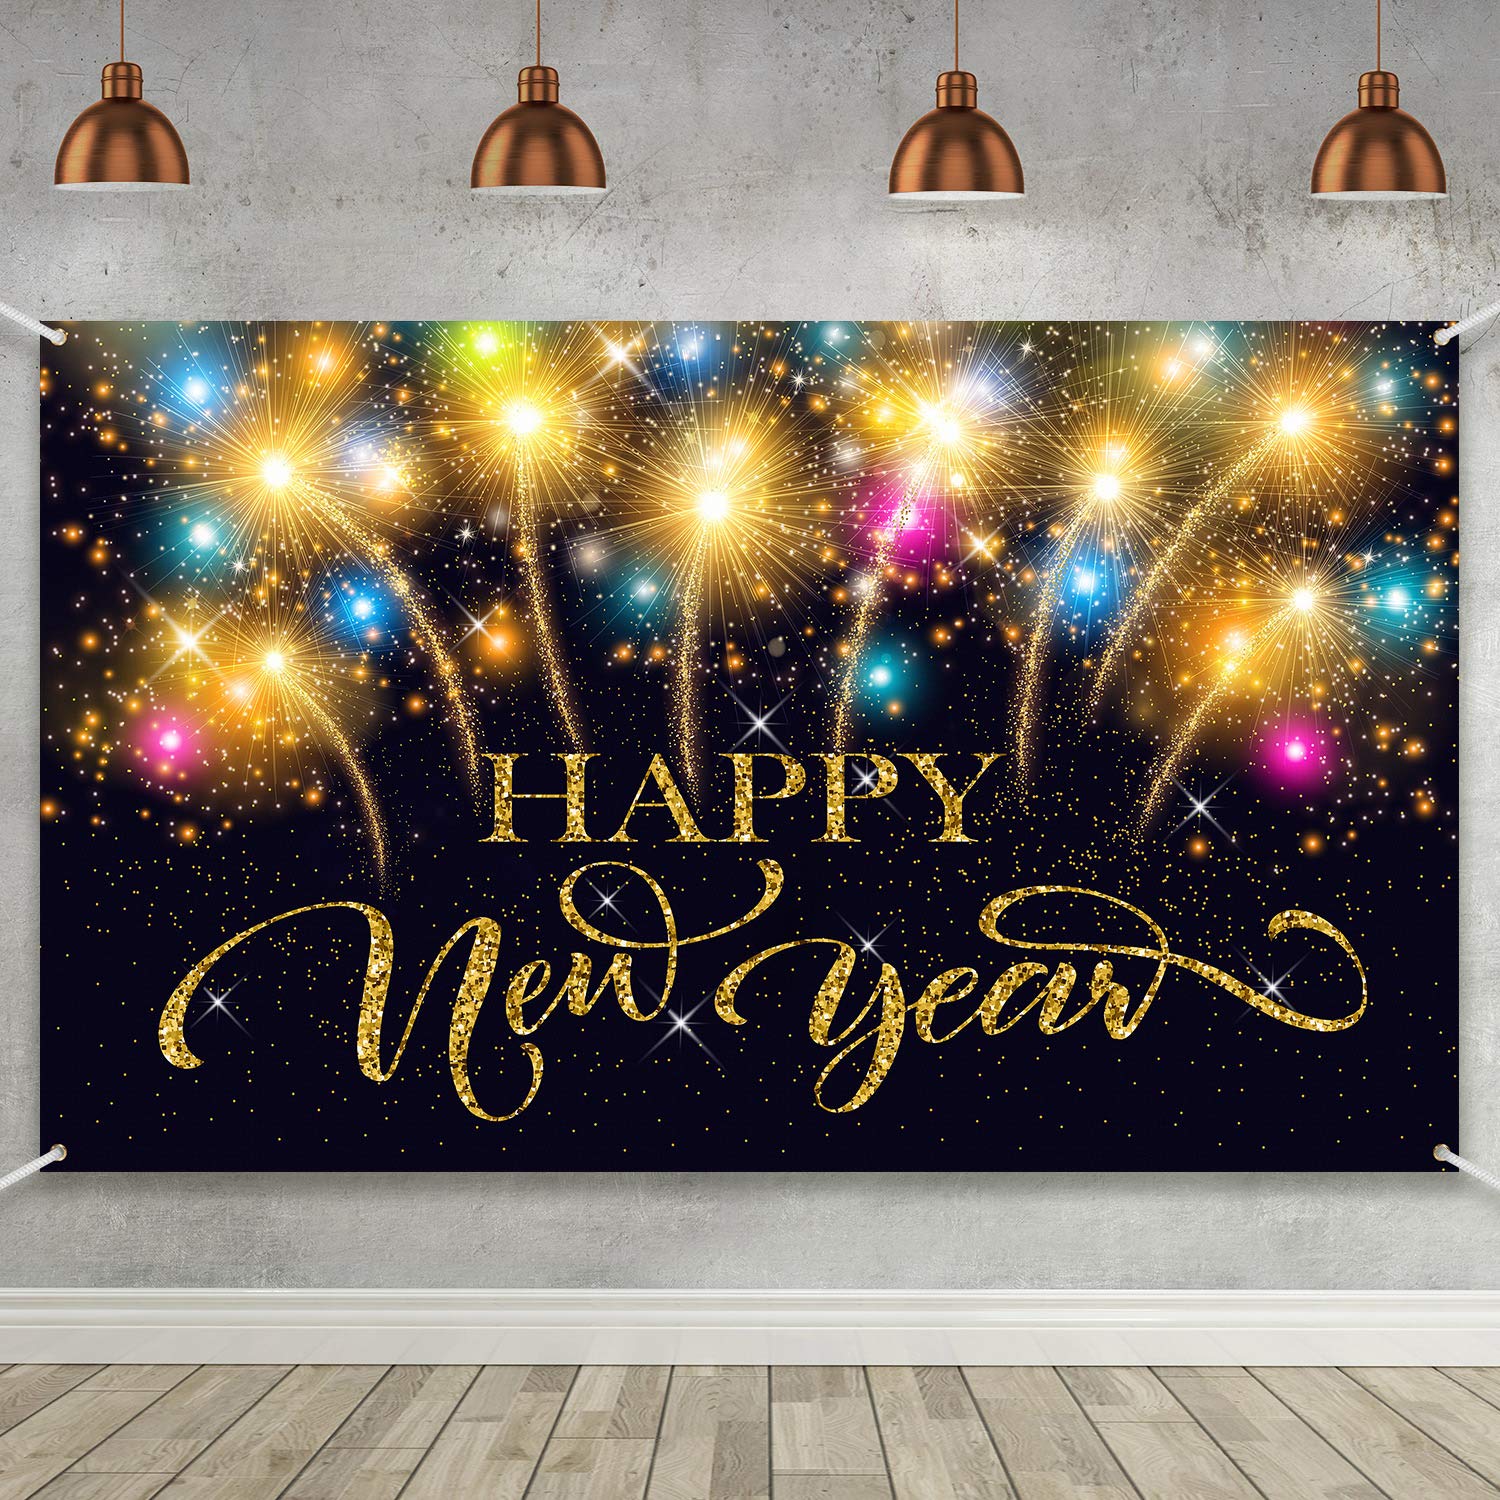 New Year With Decoration Background